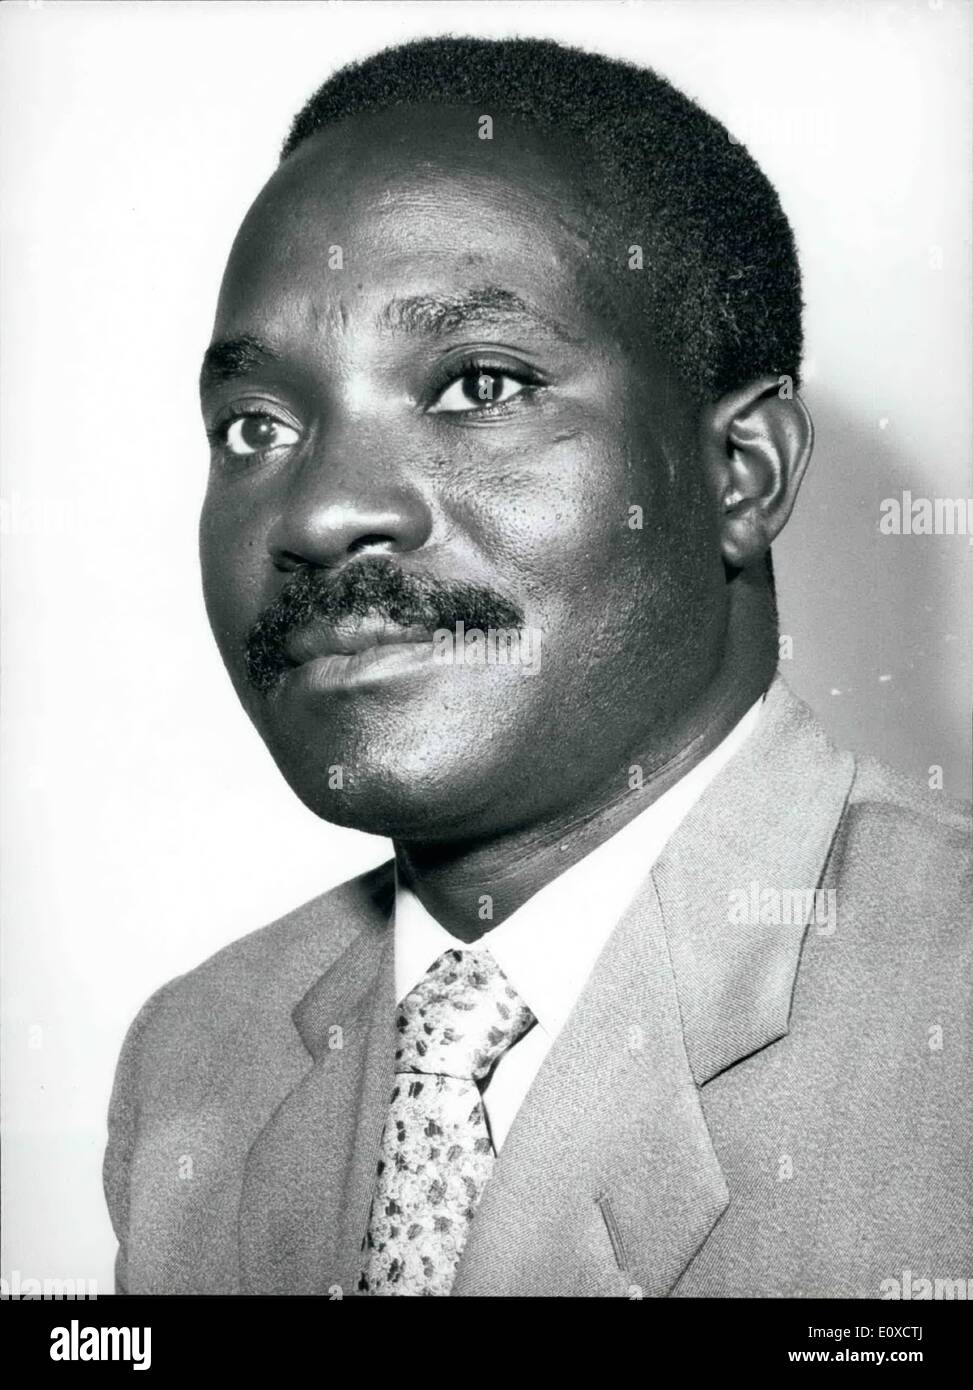 Jun. 06, 1966 - A.G. Zulu, Minister of Lands and Mines. Stock Photo